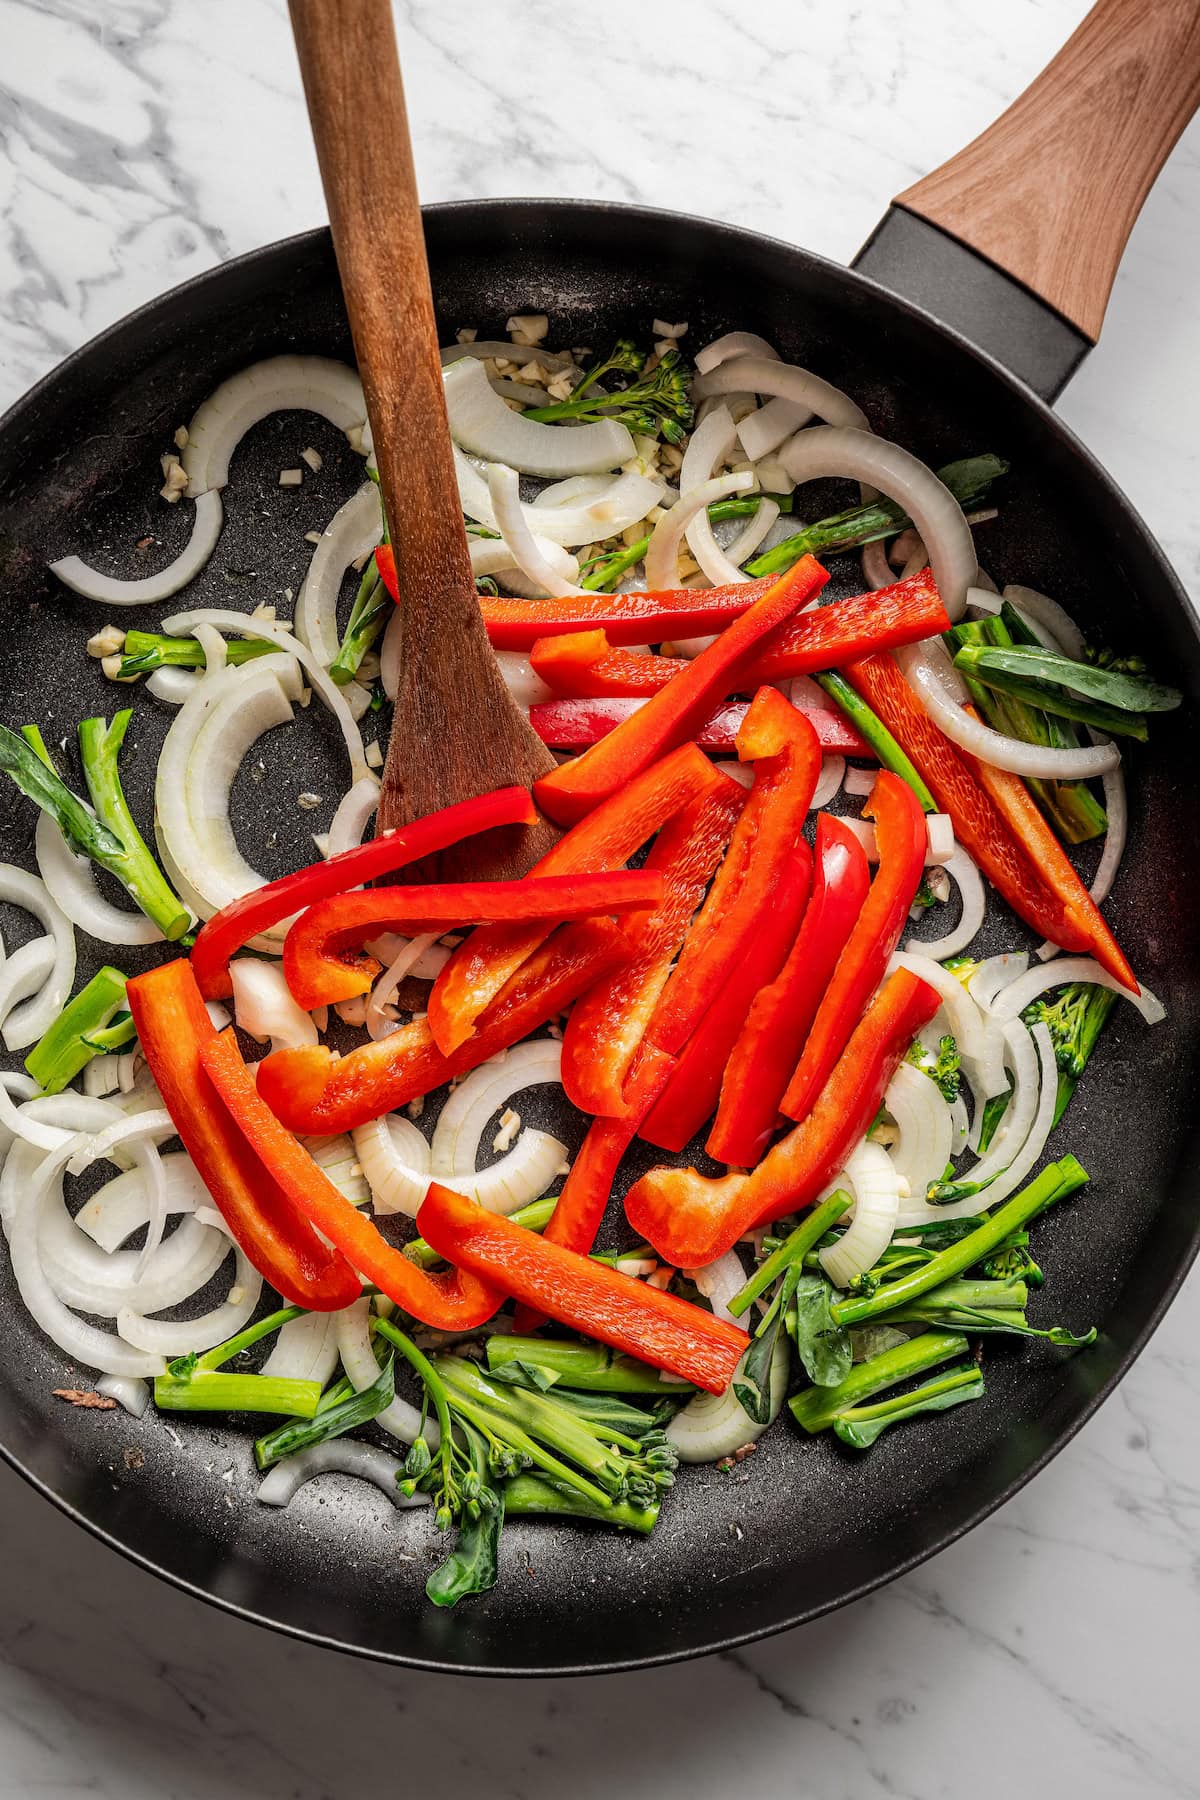 Red pepper slices, onions, and broccolini stems in a skillet with a wooden spoon.